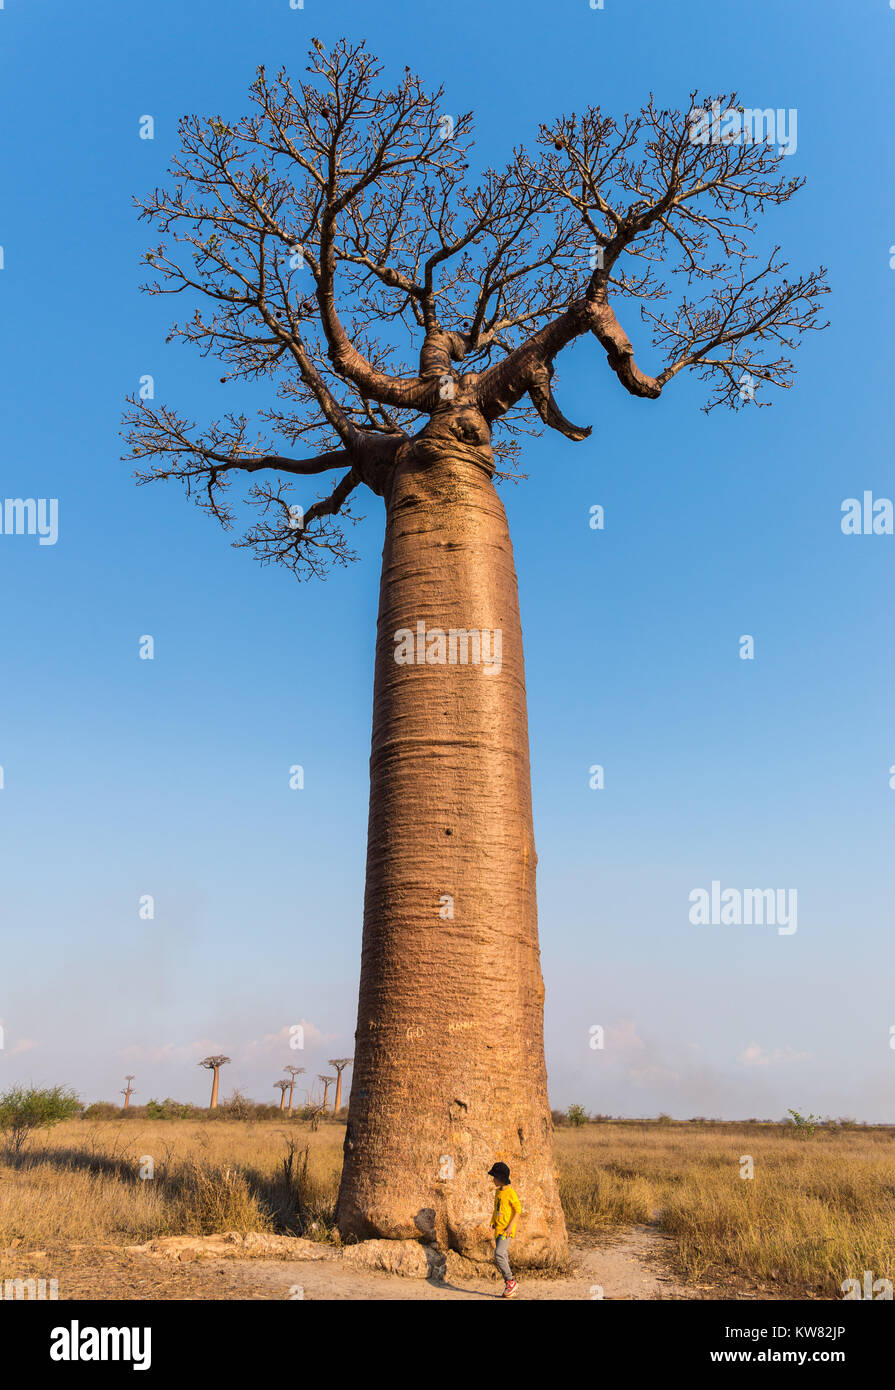 A little boy stand in front of a giant Baobab tree (Adansonia grandidieri) at the Avenue of Baobabs. Madagascar, Africa. Stock Photo